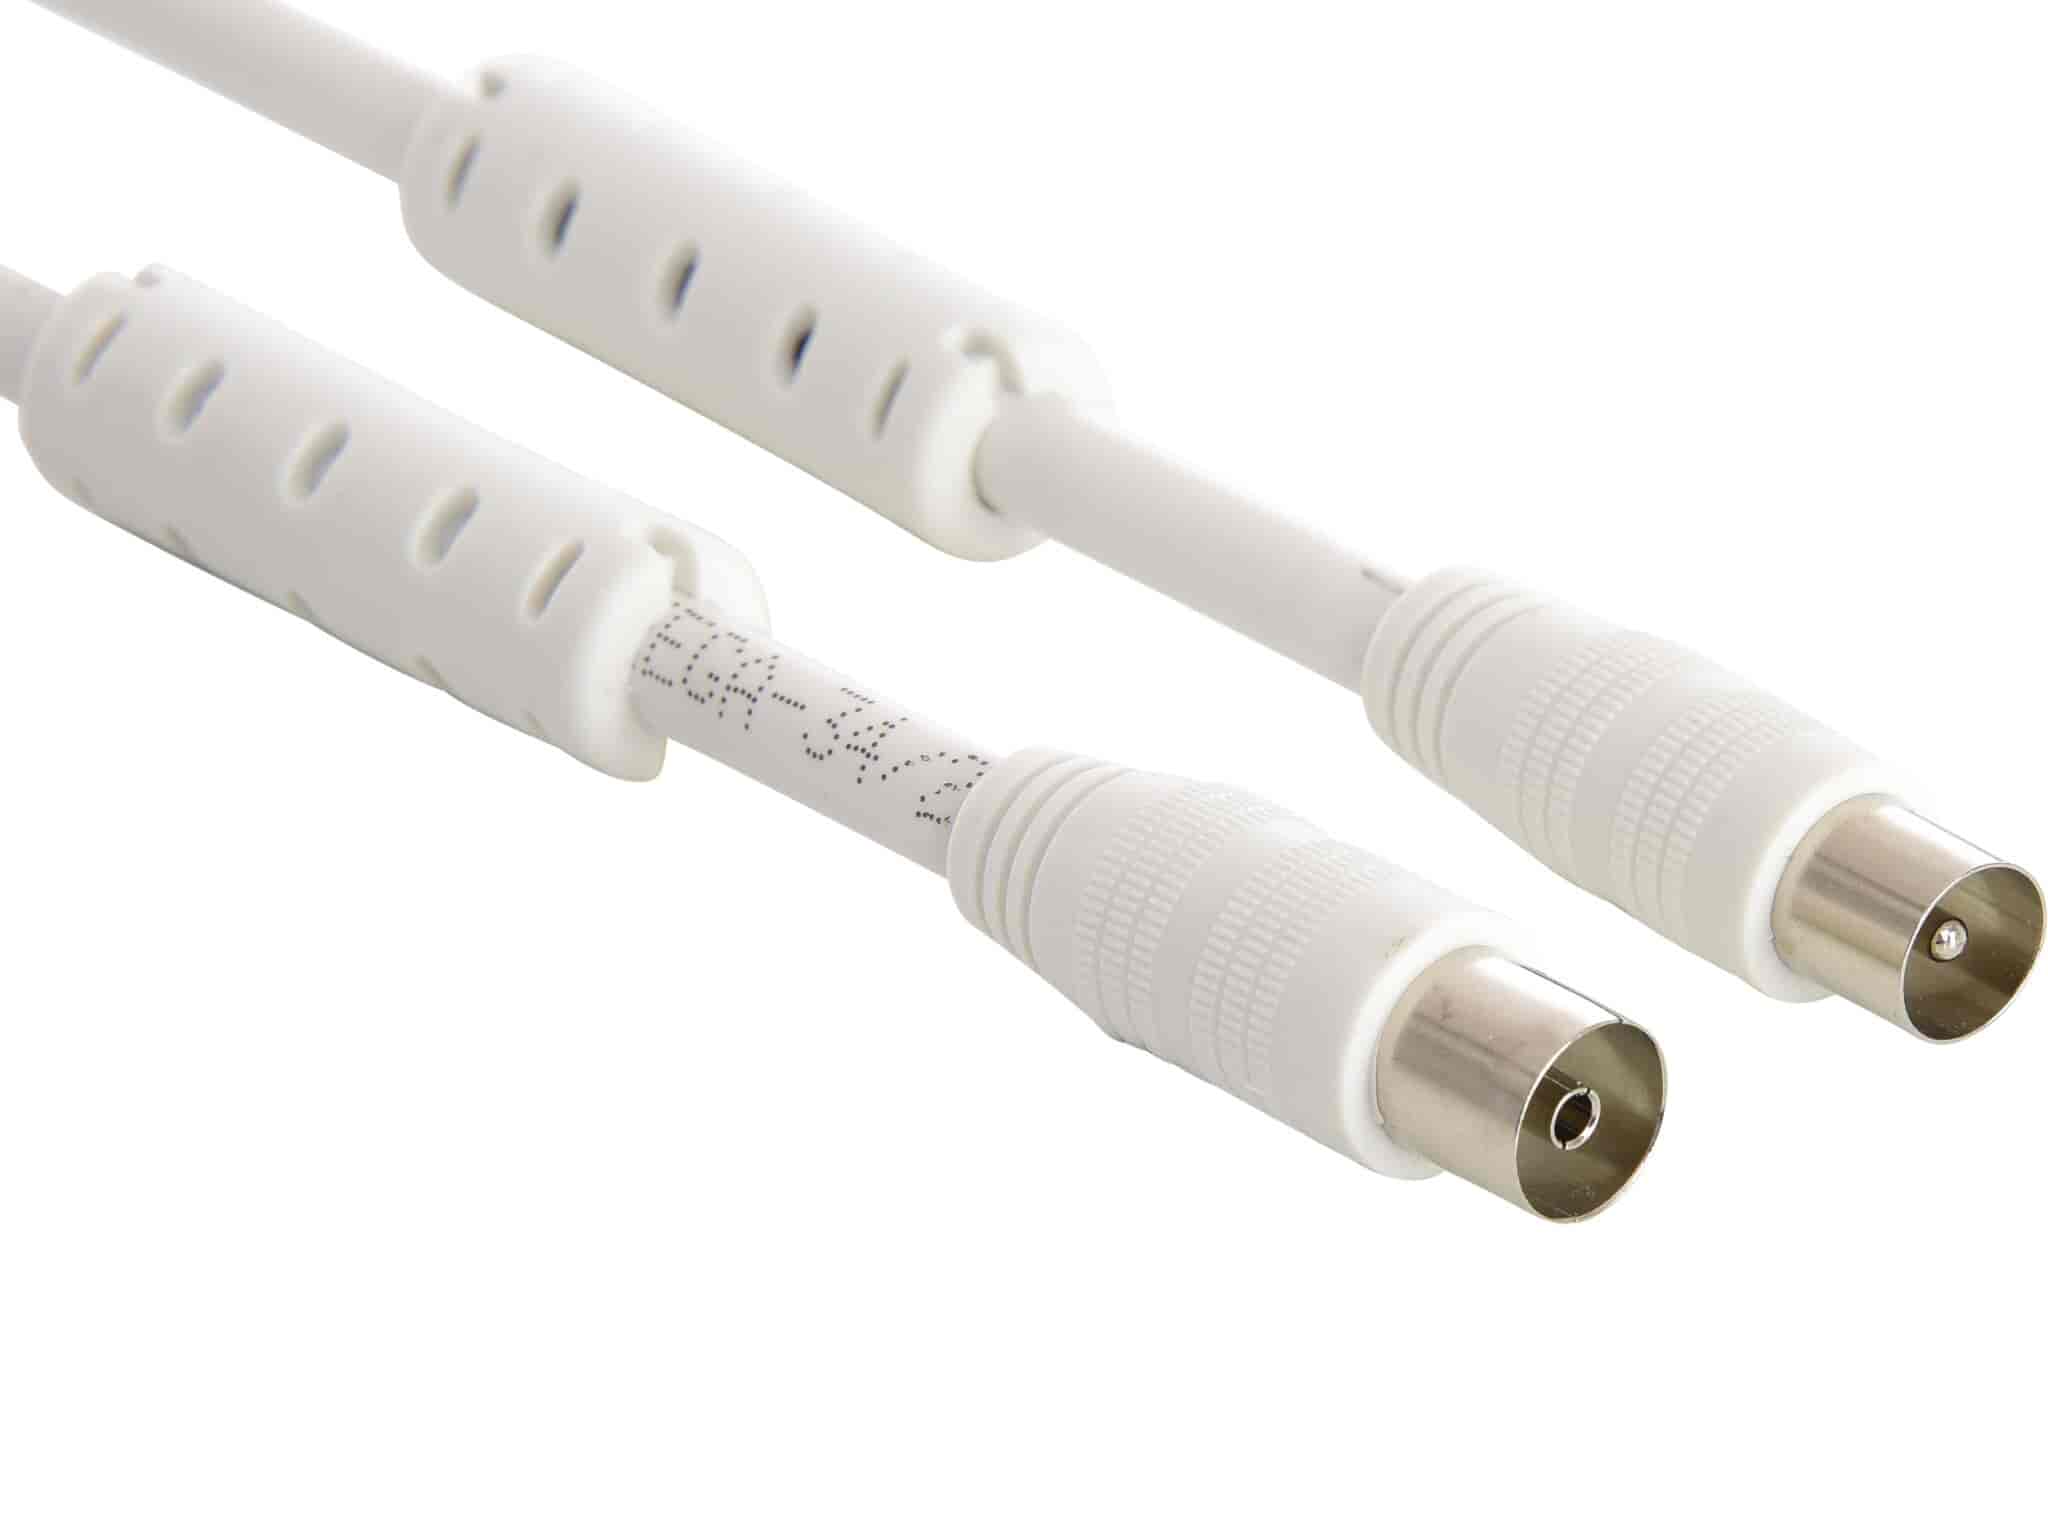 Sandberg Aerial cable LTEprotected 1.5mAerial cable for use with ordinary aerial devices, generally radios or TVs. The cable is made from high-quality materials, ensuring optimal signal quality without noise and interference, specially optimized to produce a razor-sharp picture on your flat screen TV.Sandberg